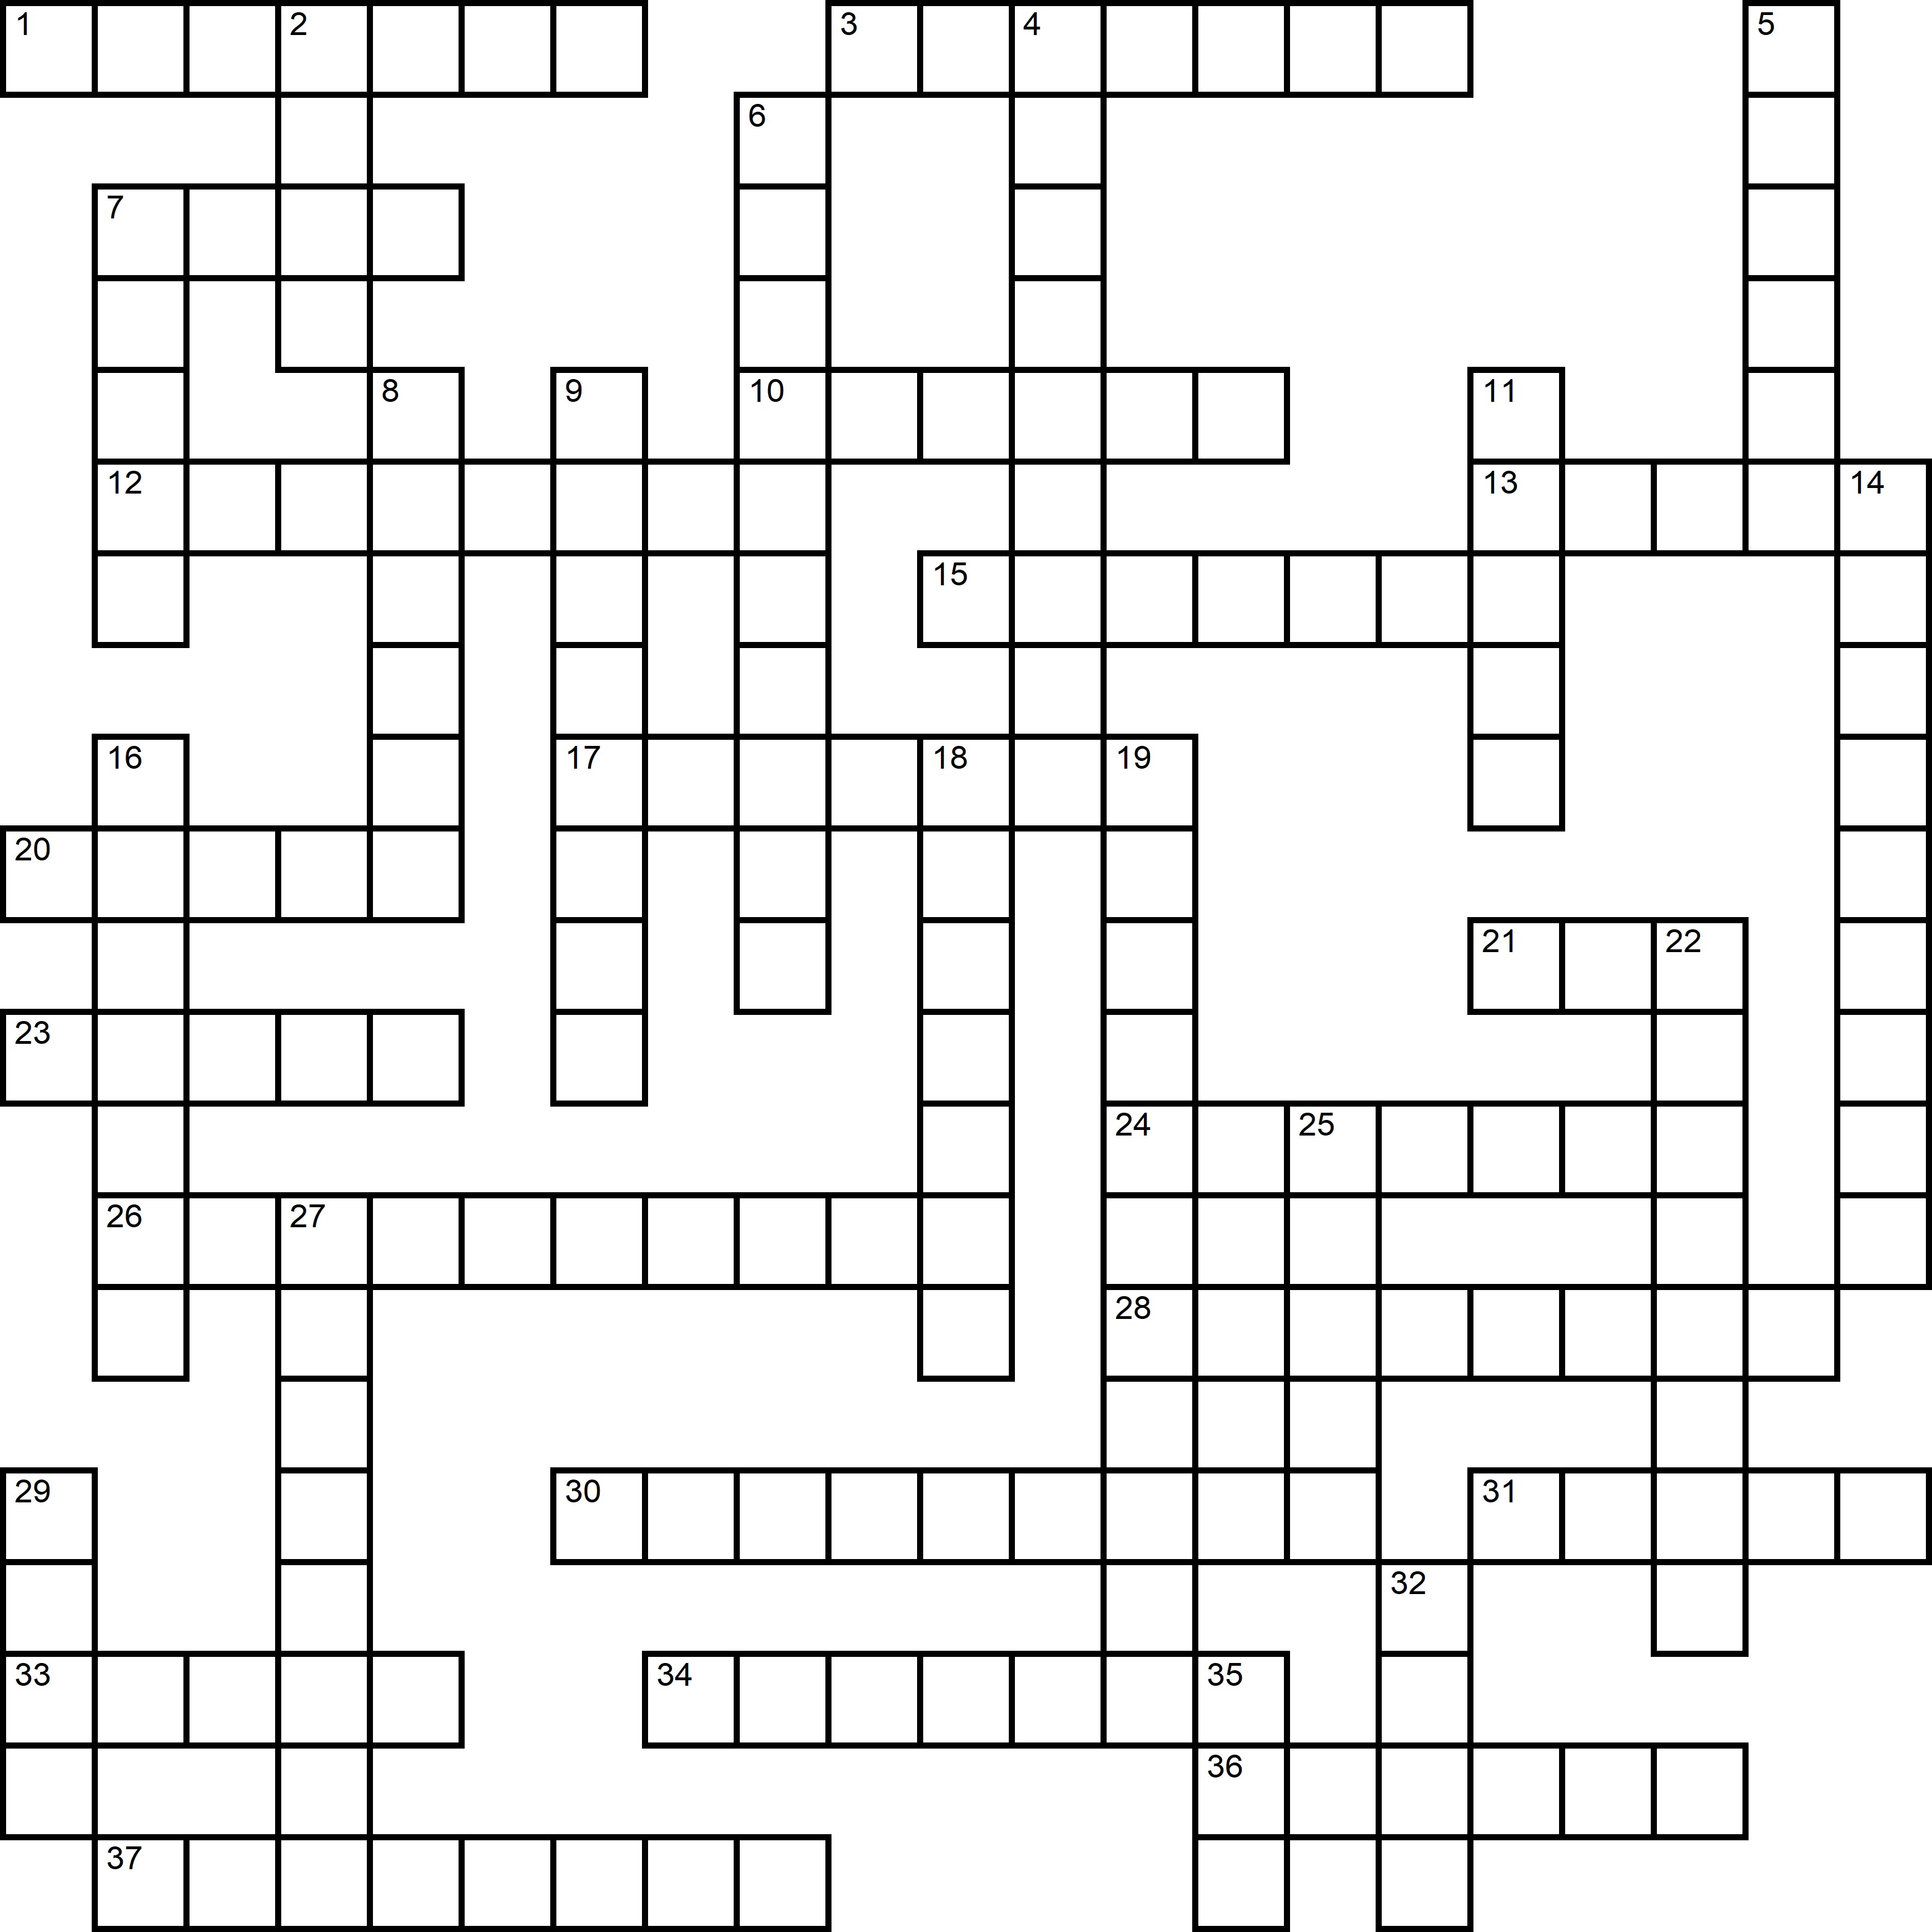 Easy Crossword About Clothing